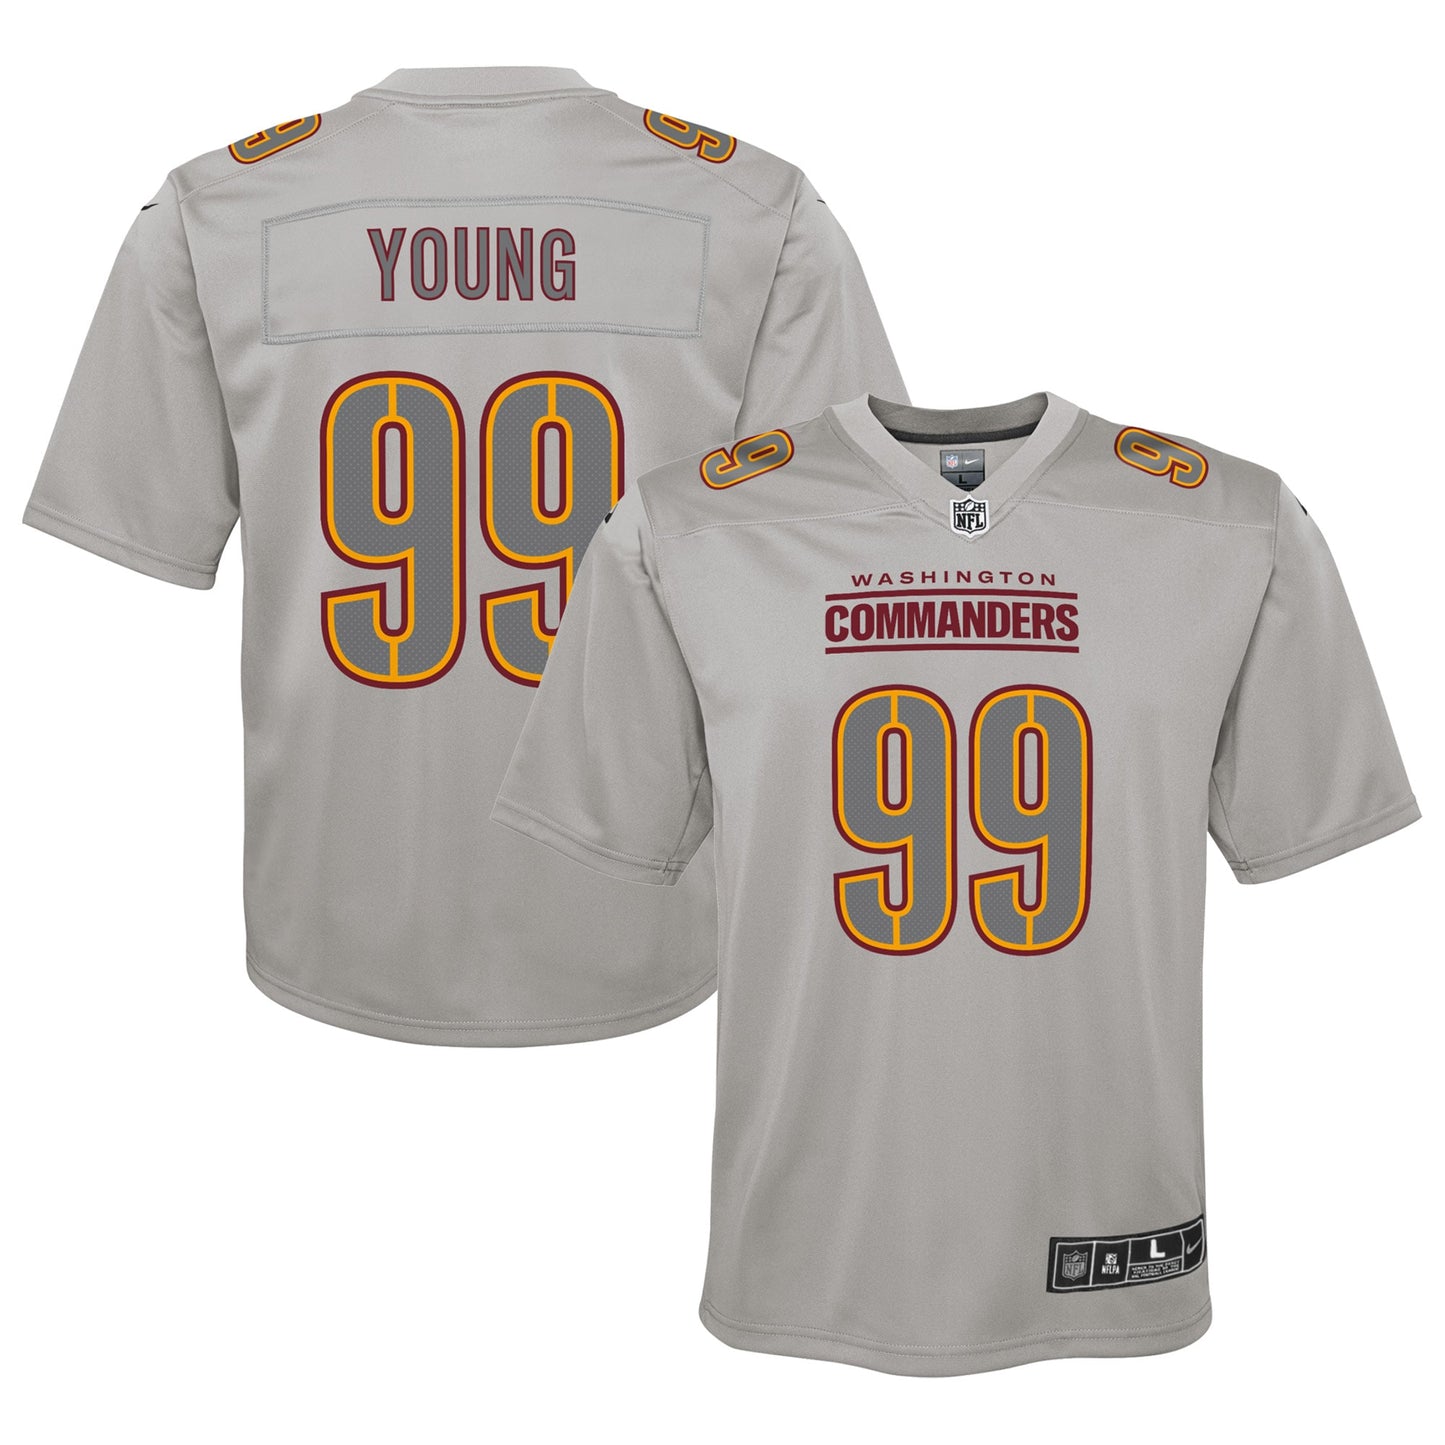 Chase Young Washington Commanders Nike Youth Atmosphere Fashion Game Jersey - Gray